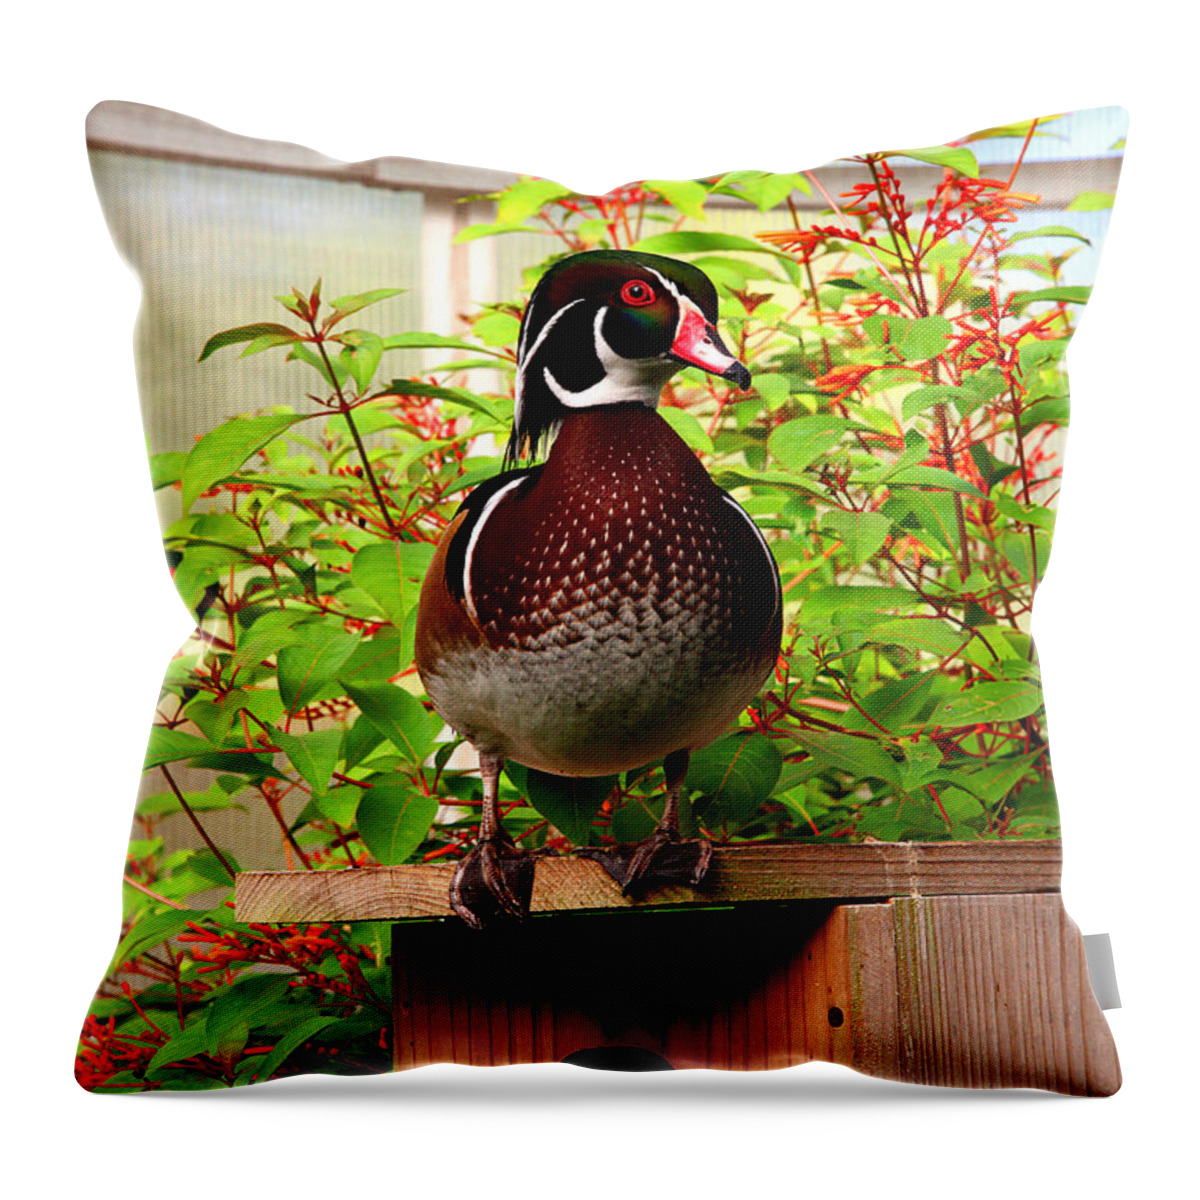 Duck Throw Pillow featuring the photograph Colorful Wood Duck by Jan Marvin